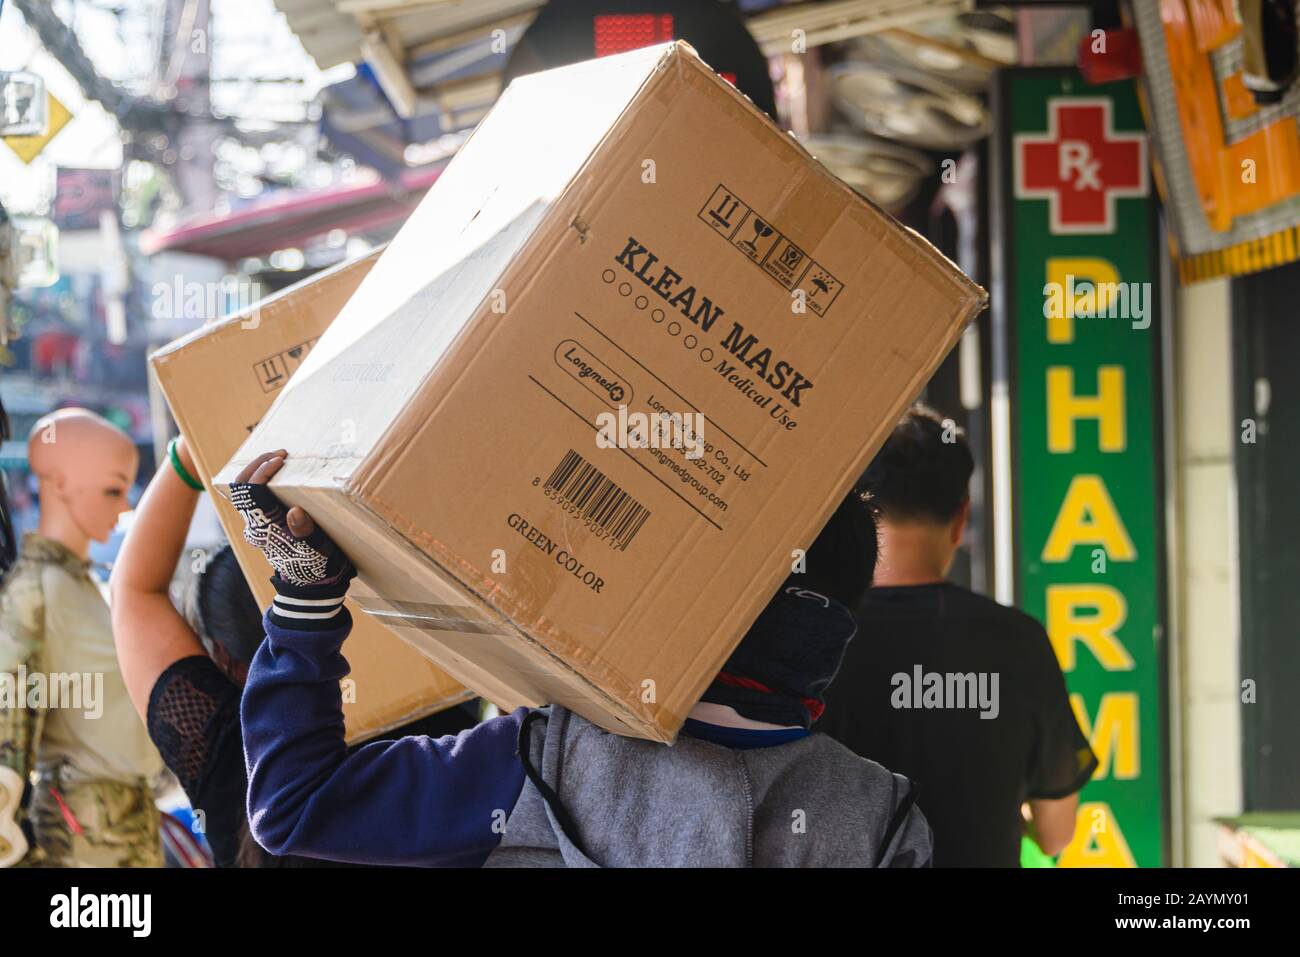 Men deliver large boxes of face masks to a pharmacy in Phuket Old Town during the Coronavirus COVID-19 pandemic, Bangkok. Stock Photo